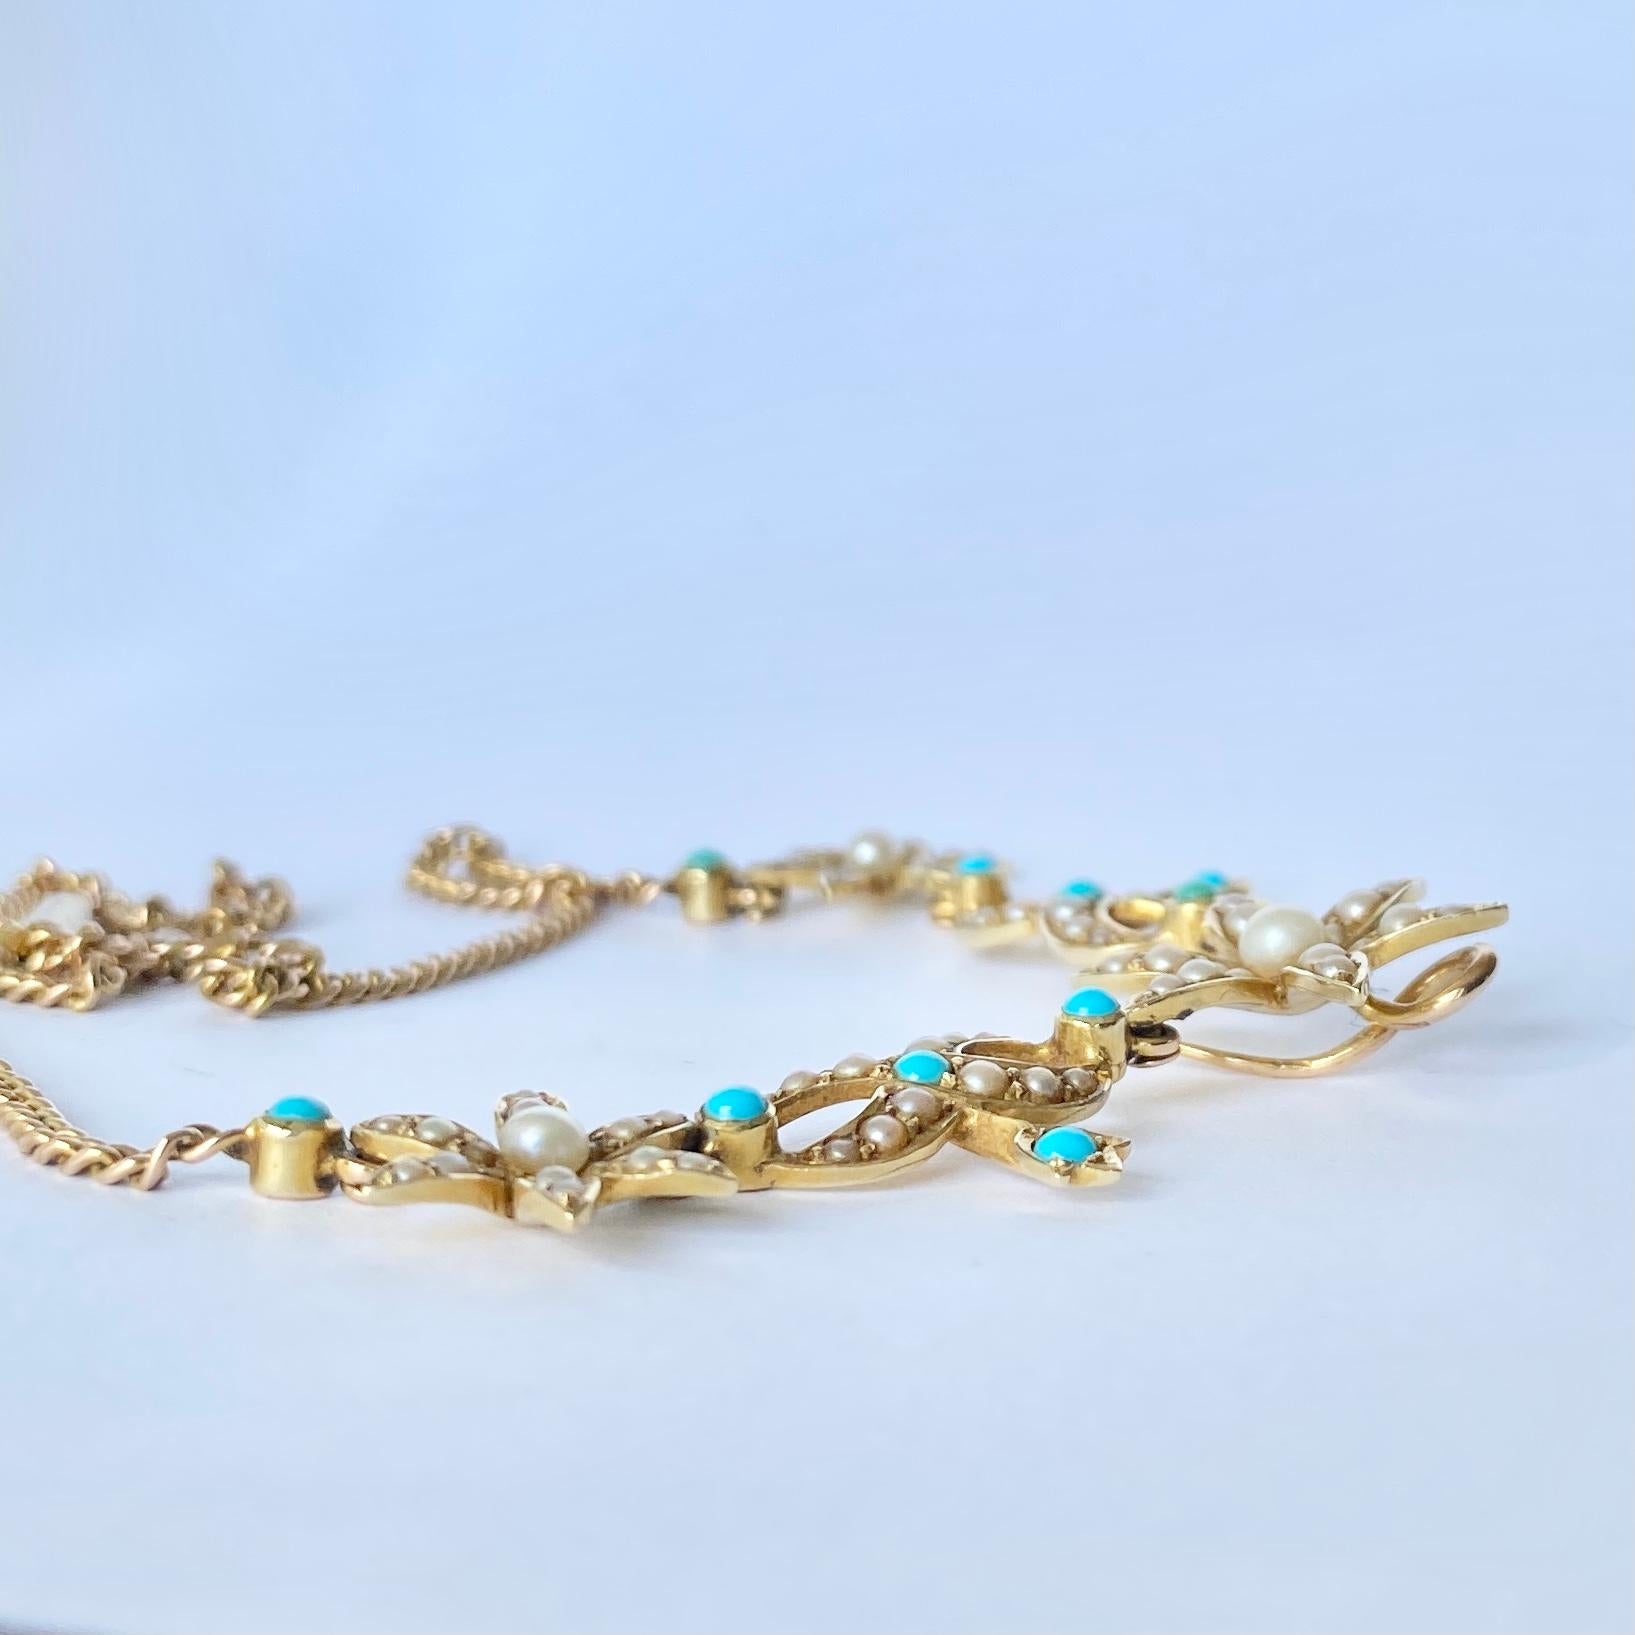 The chain on this necklace is a curb link and the main detail includes a flower and leaf design. There are turquoise and pearls set within this 18ct gold. 

Length: 41cm
Widest Point: 20cm

Weight: 12.2g